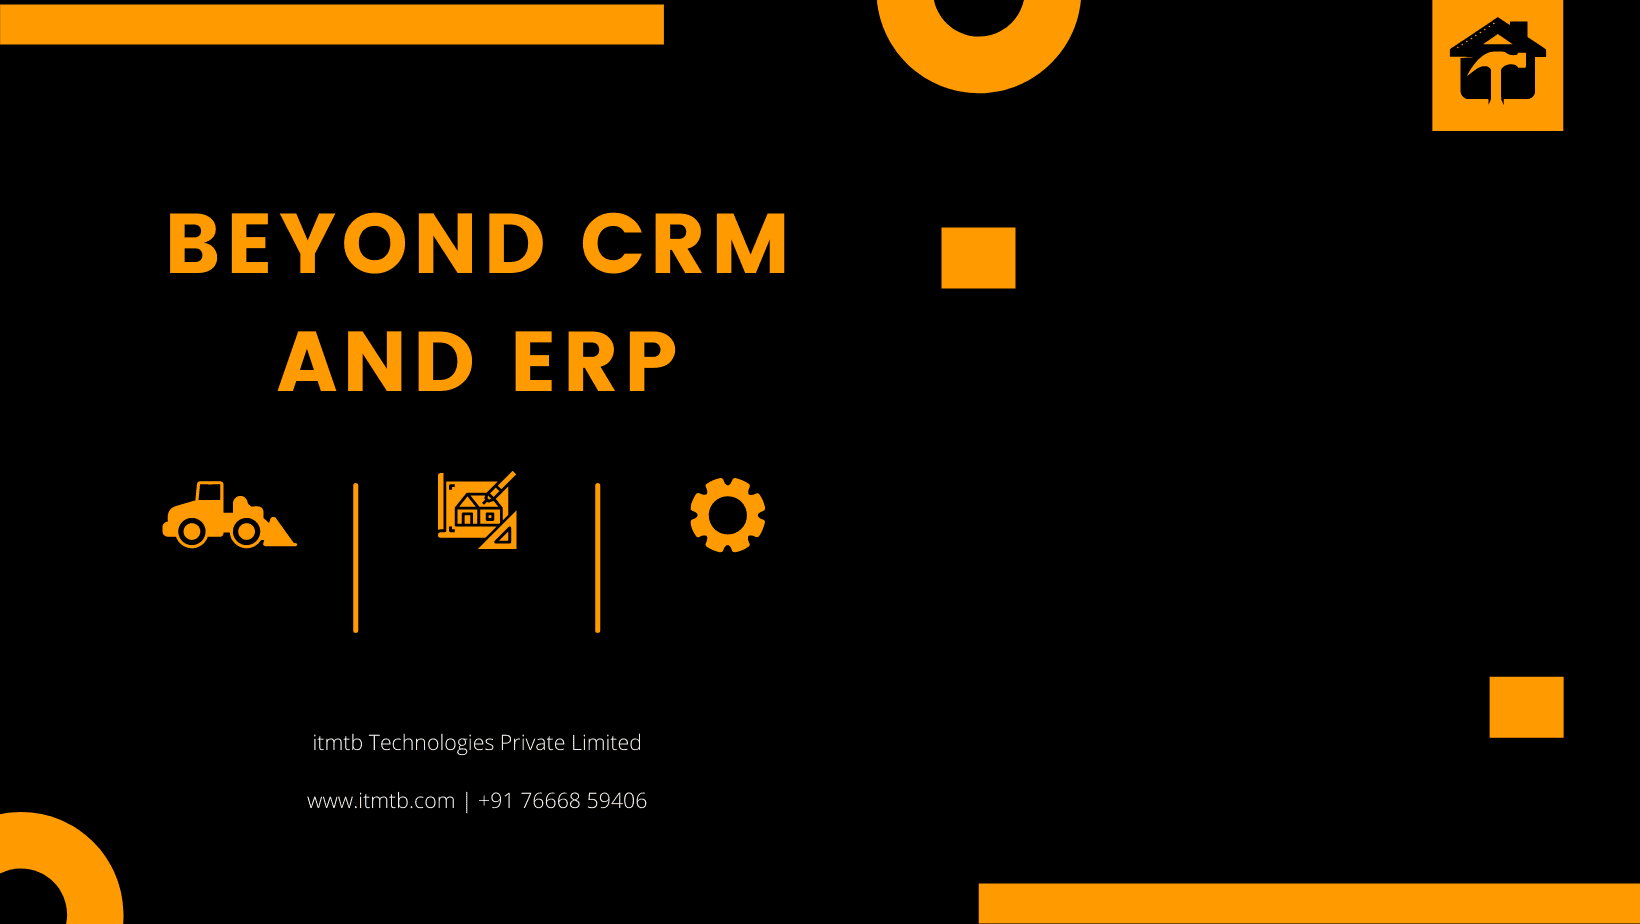 Beyond CRM and ERP.